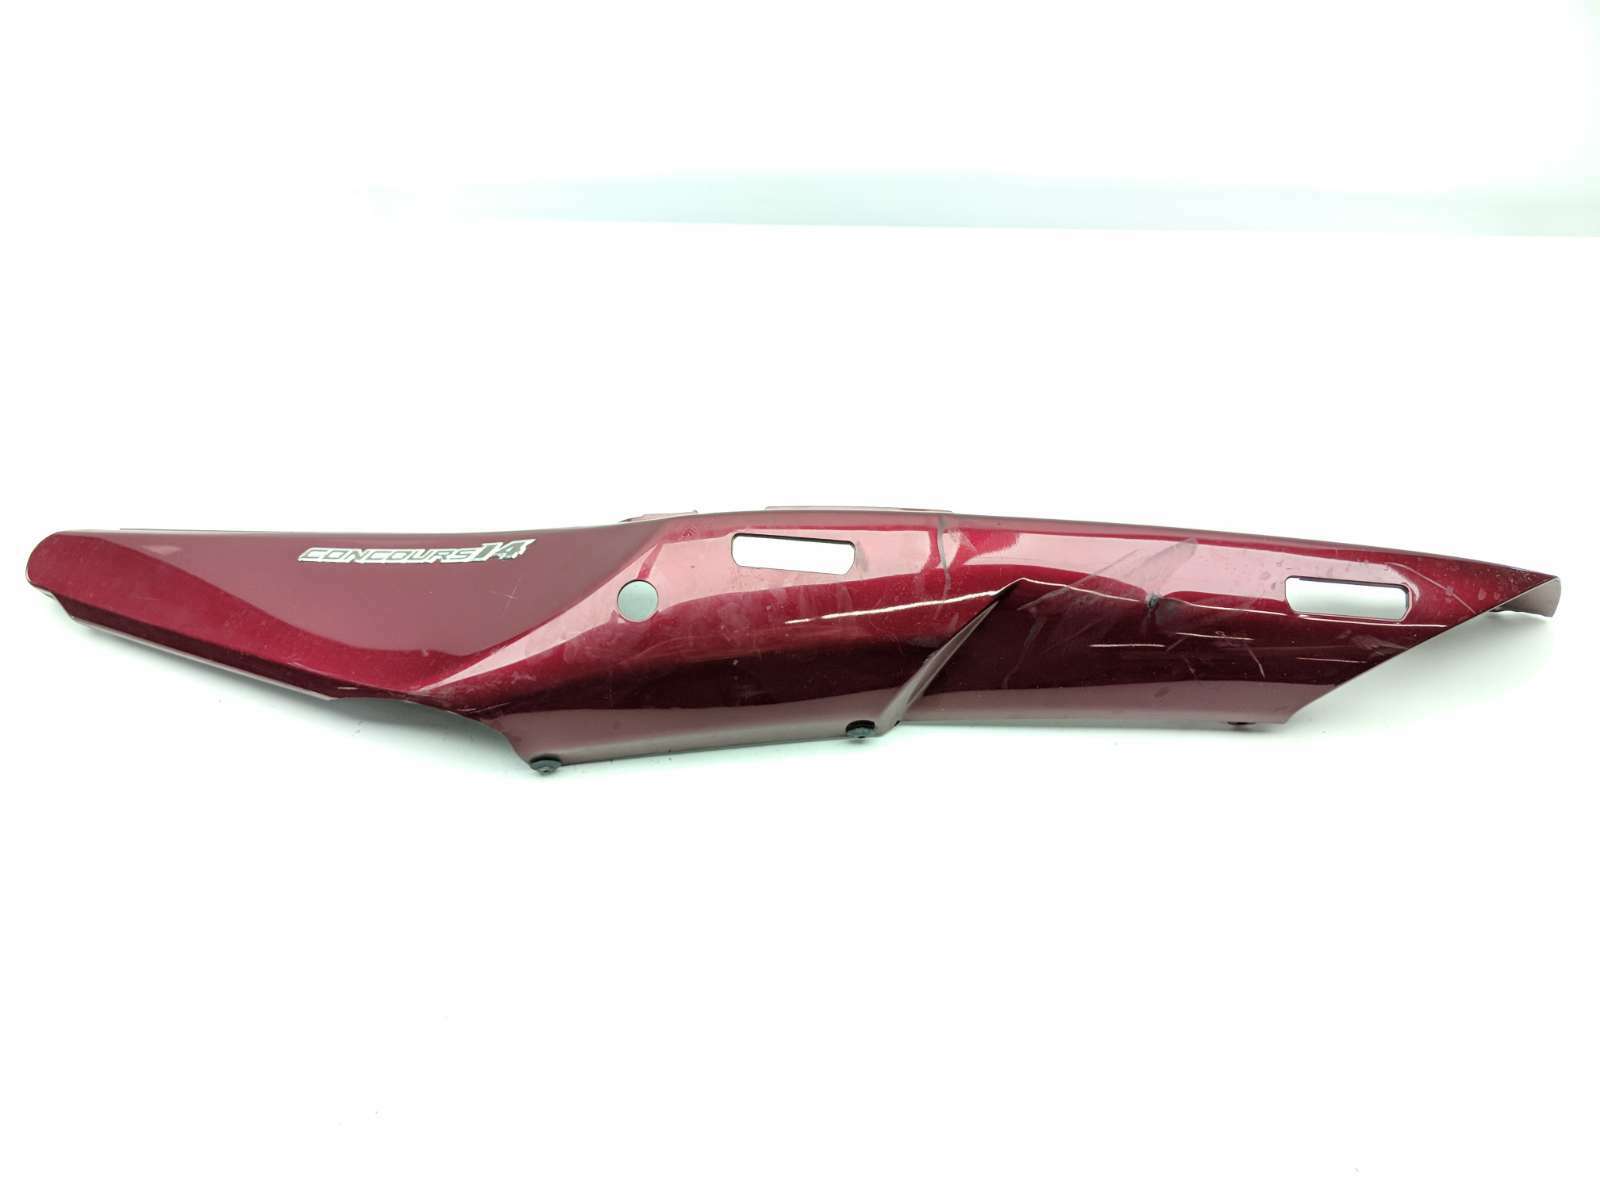 08 09 Kawasaki Concours ZG1400 Left Side Cover Panel Fairing